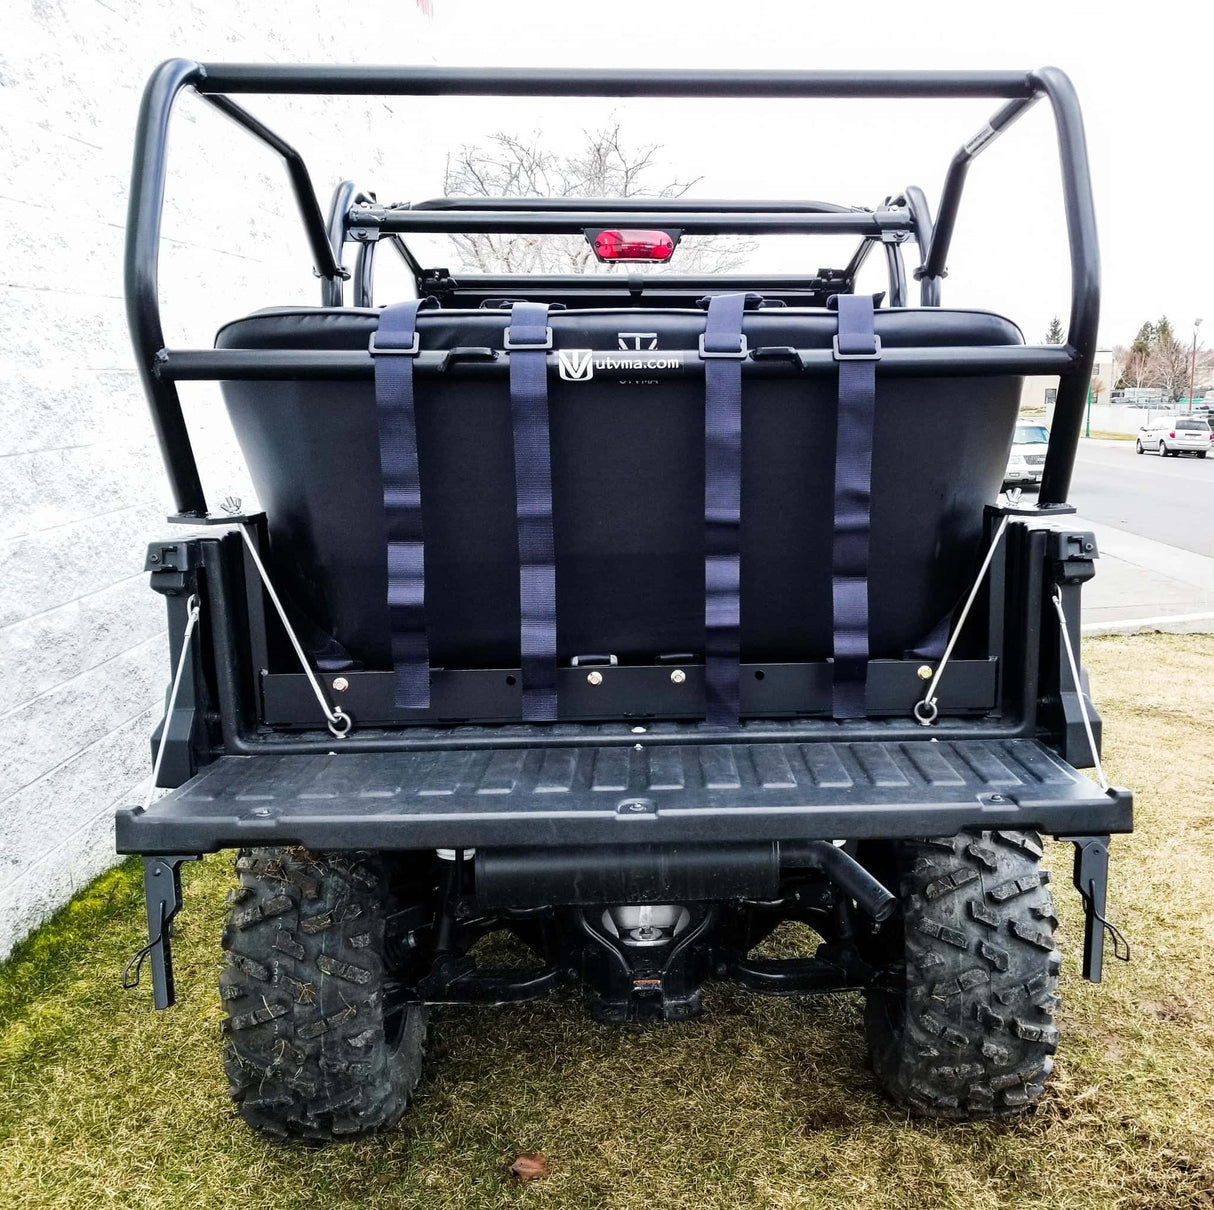 UTVMA Textron Stampede Backseat & Roll Cage Kit